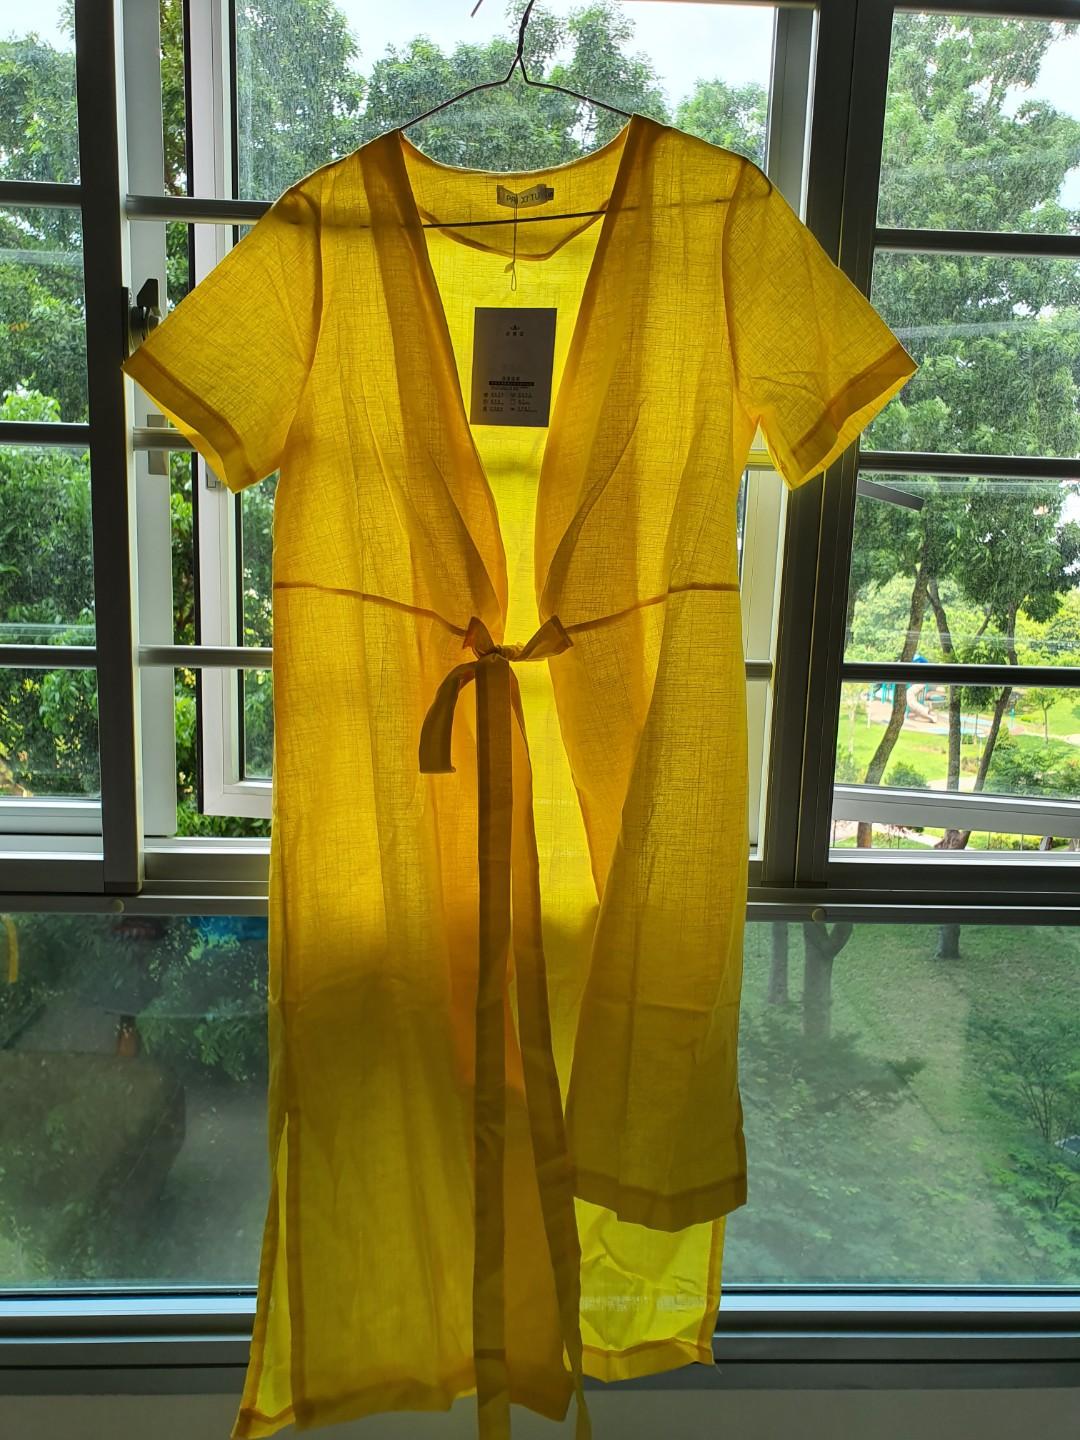 BNWT Yellow Dress and grey top suitable 